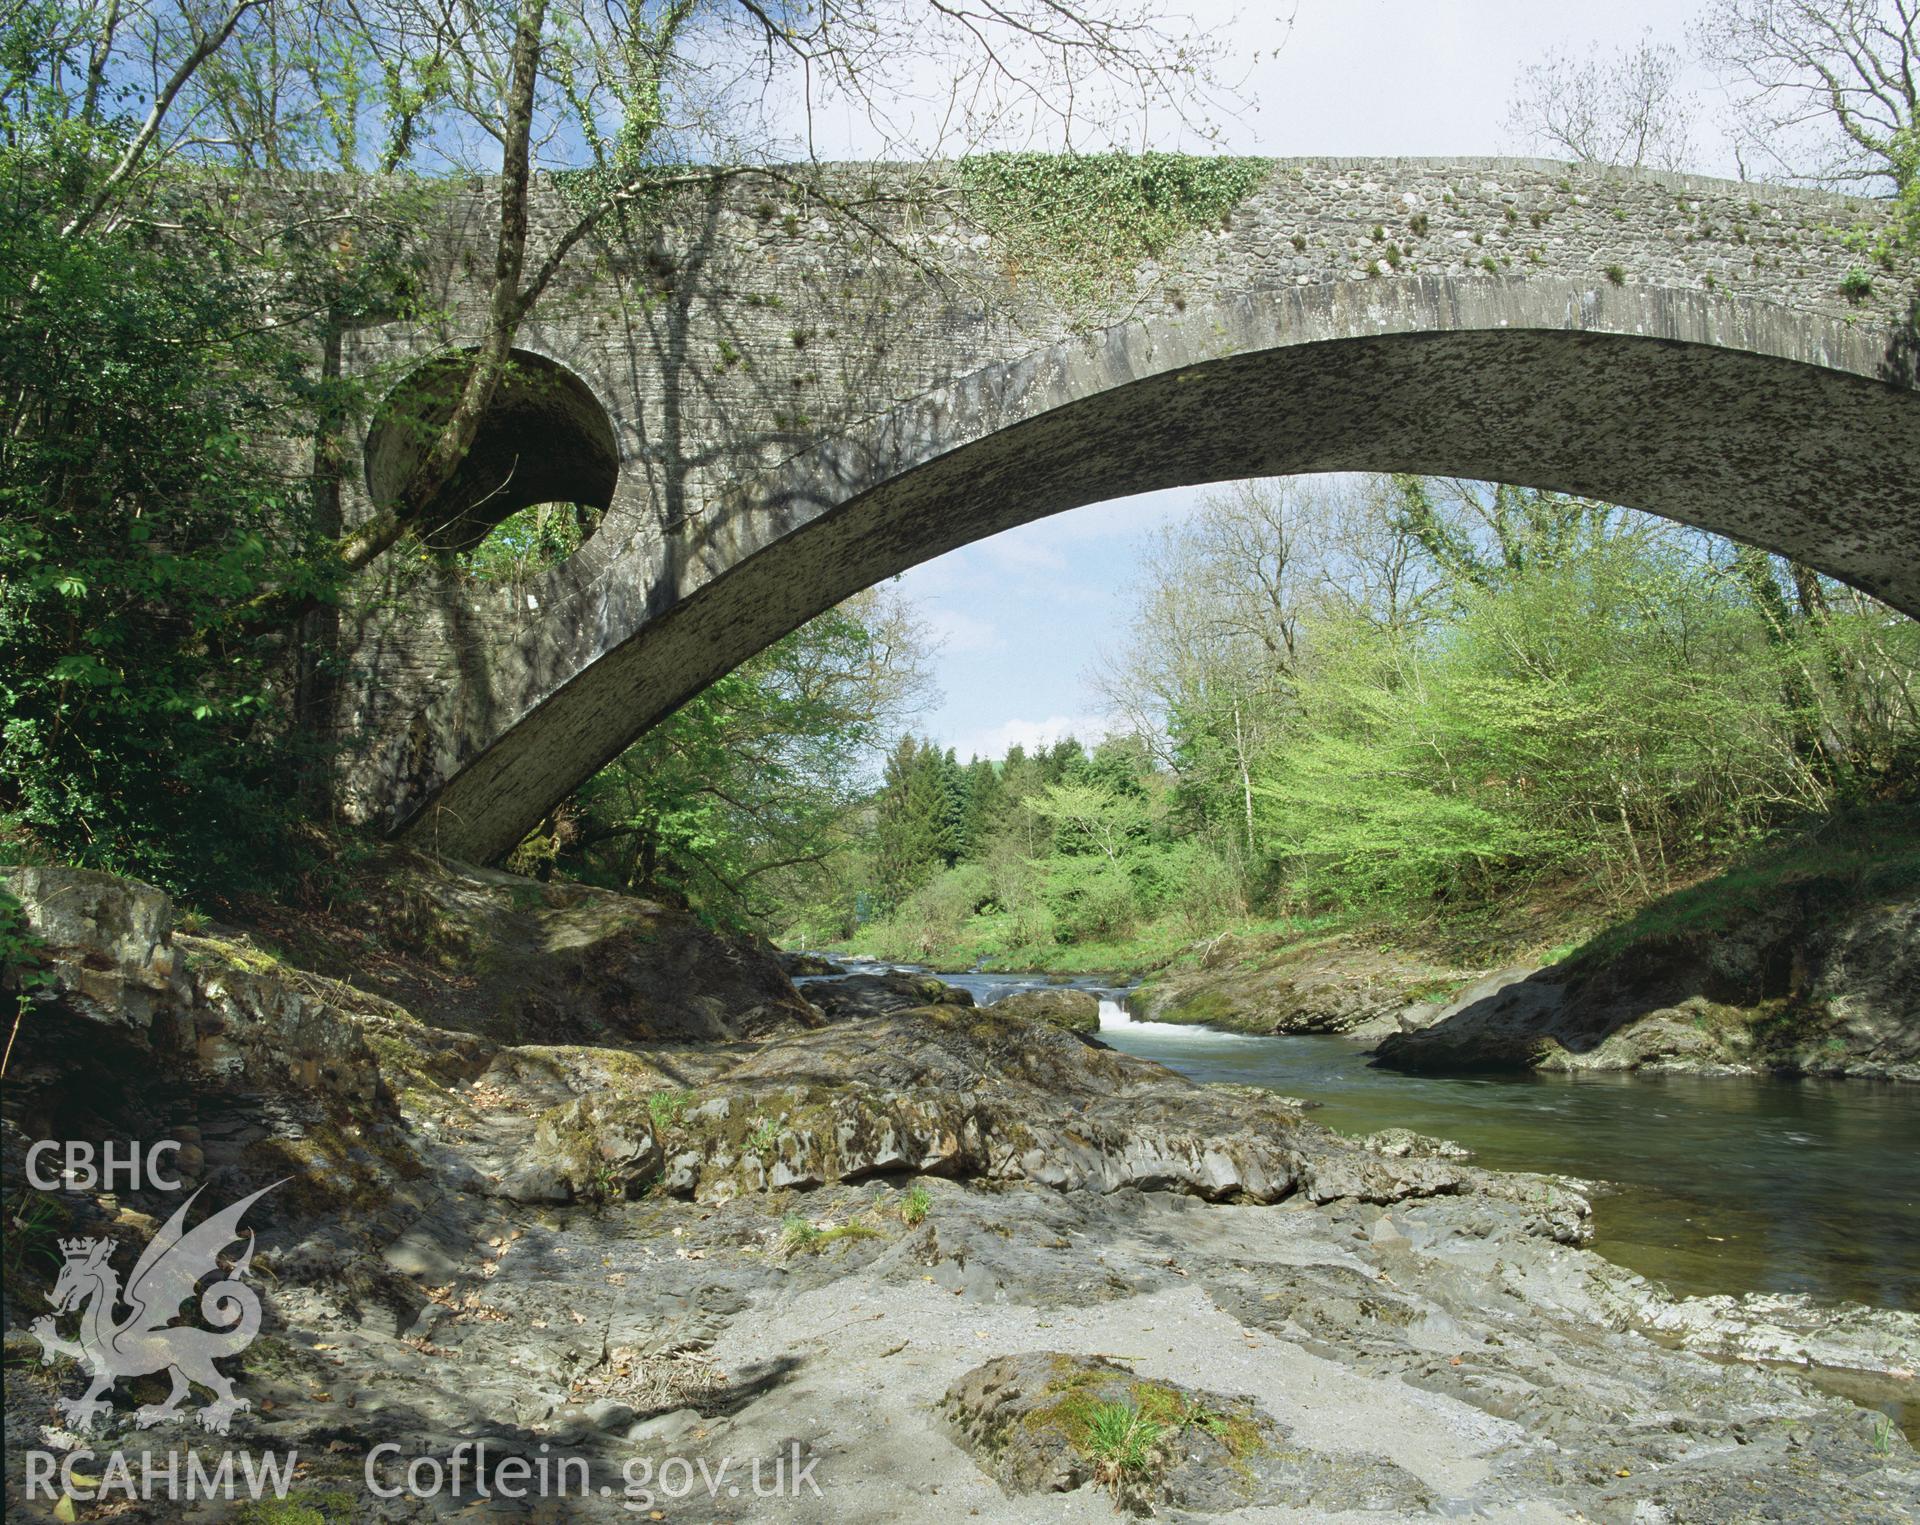 Colour transparency showing a section of Dolauhirion Bridge, produced by Iain Wright, June 2004.